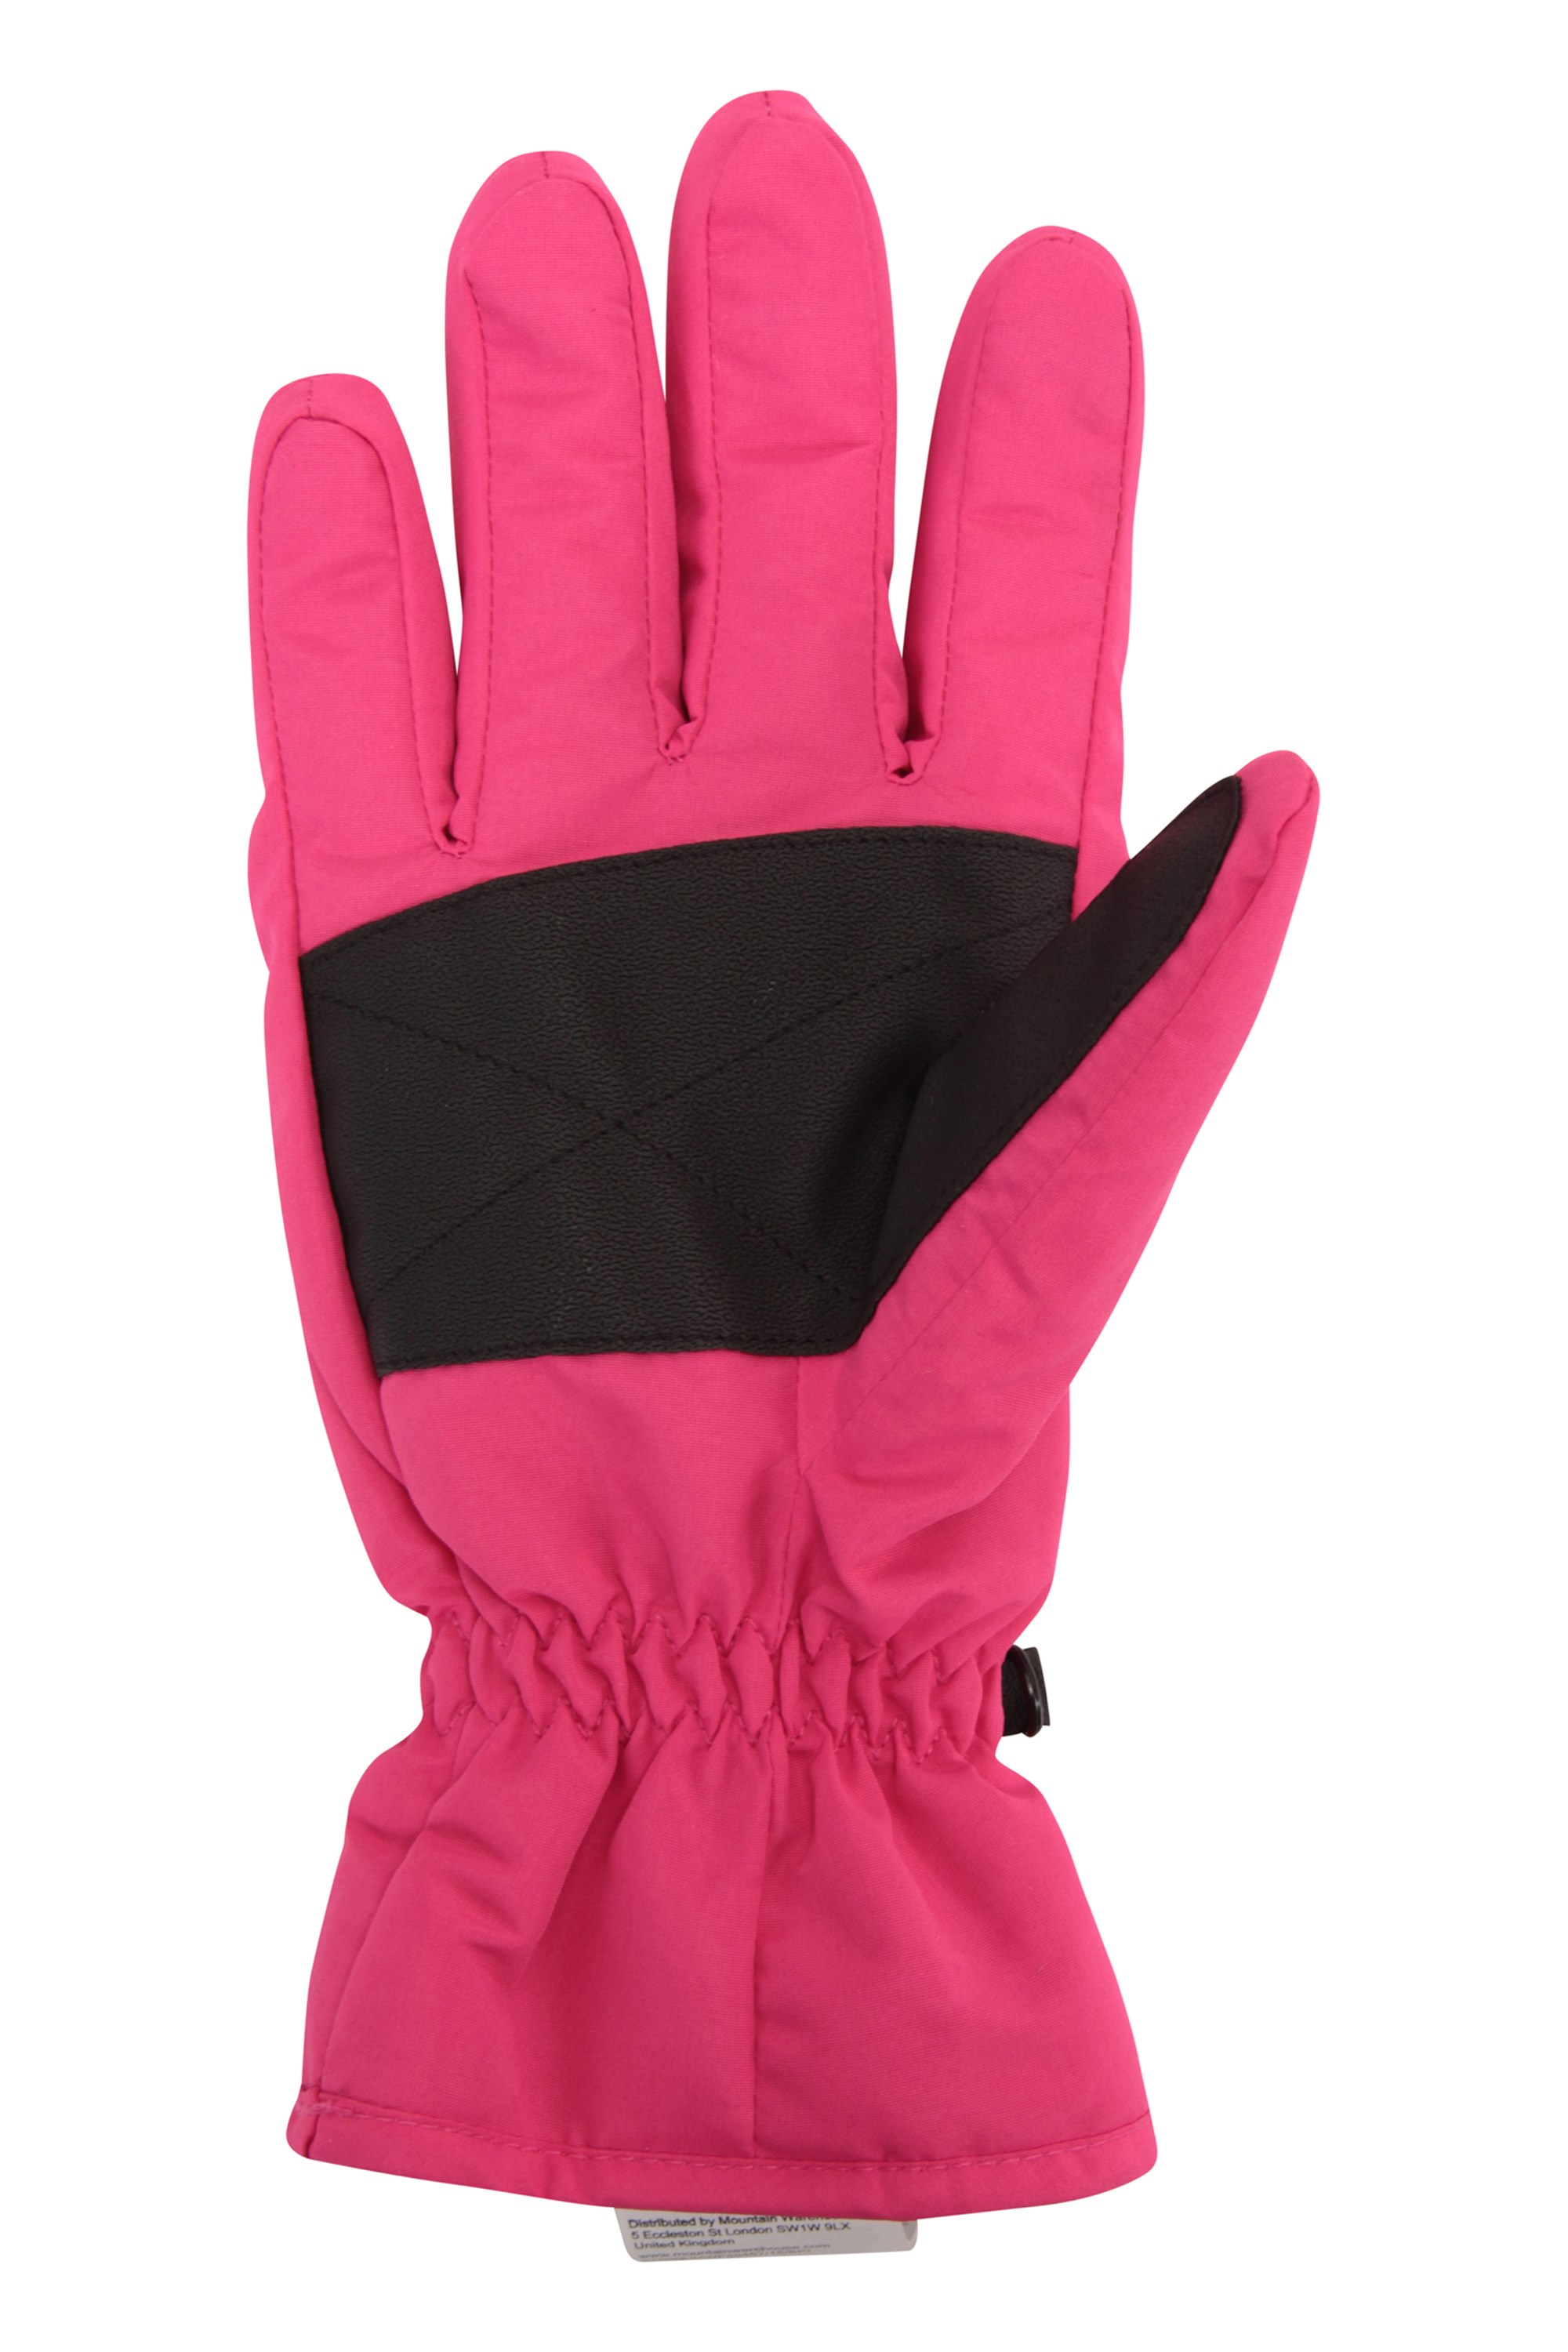 Mountain Warehouse Slalom Womens Ski Glove Adjustable Breathable Easy Care Handwear Lightweight Ladies Winter Gloves Ideal for Cycling Driving & Daily Use